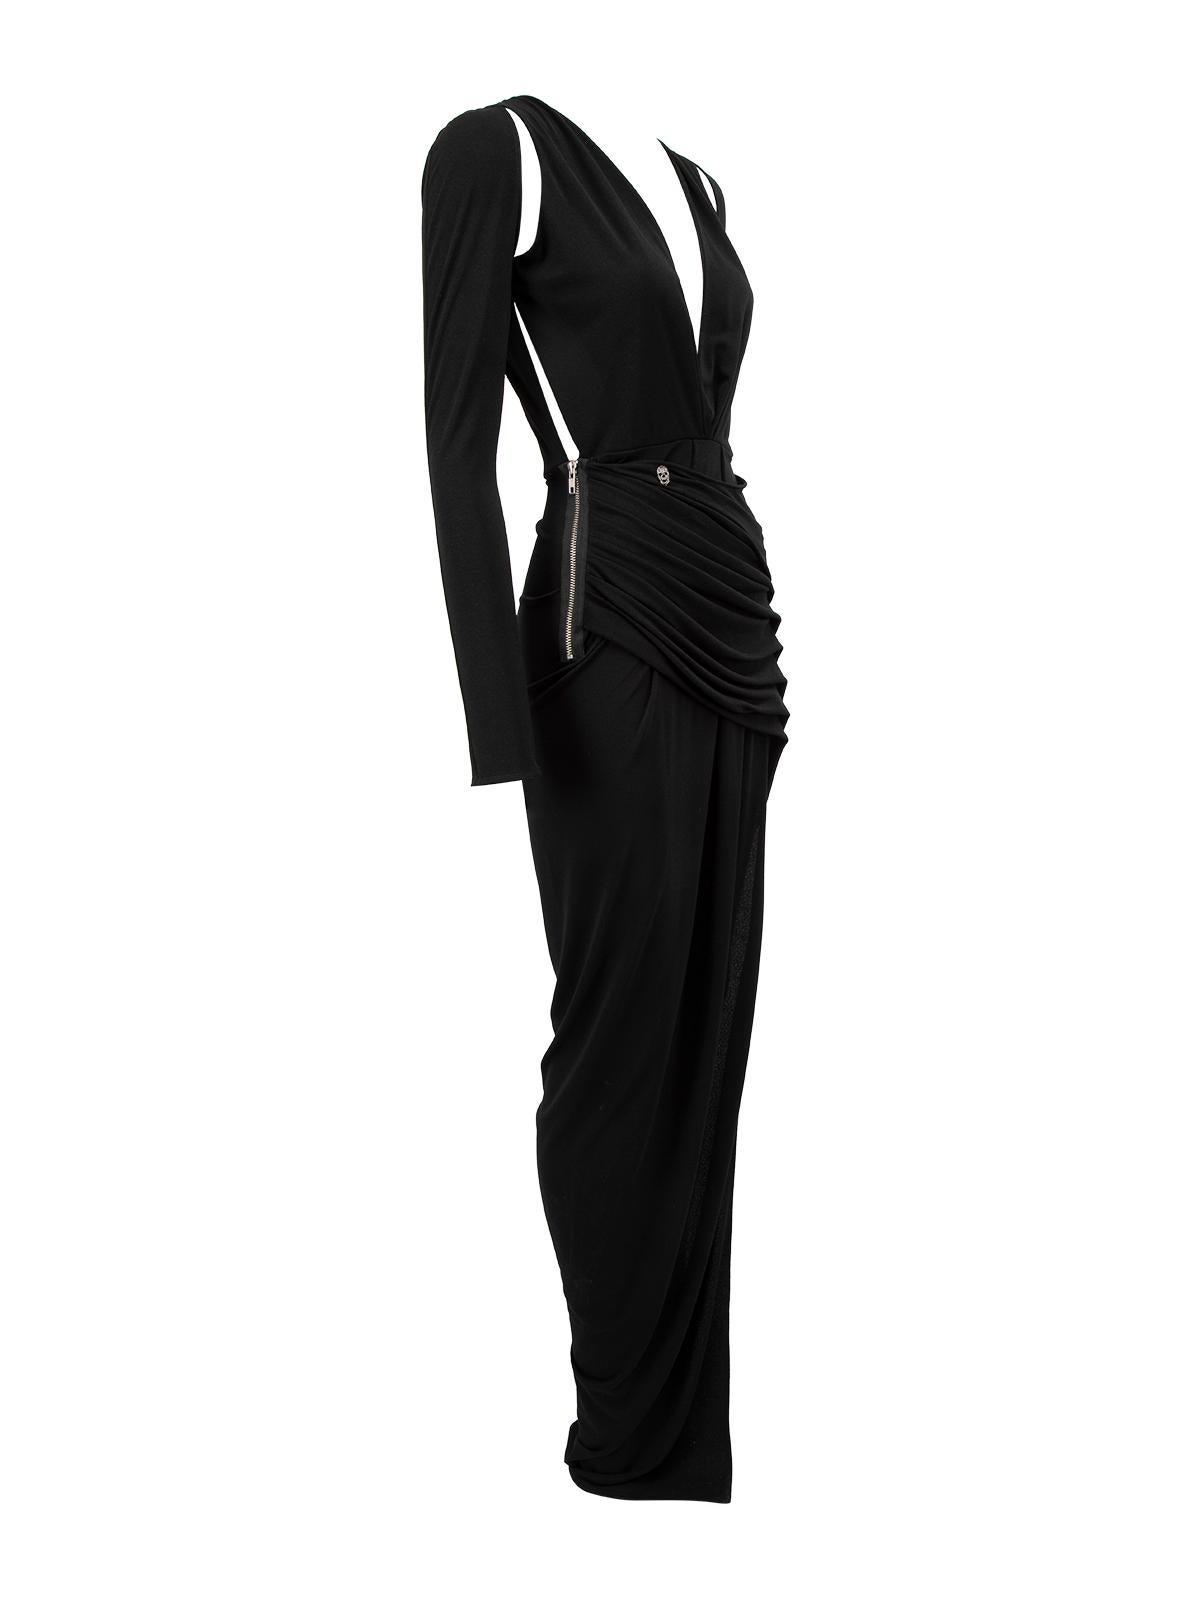 CONDITION is Very good. Minimal wear to dress is evident. There is some minimal loose stitching near the side zip on this used Philipp Plein designer resale item. Details Black Polyester Figure hugging Plunge neck Cut out shoulders Long sleeves Maxi